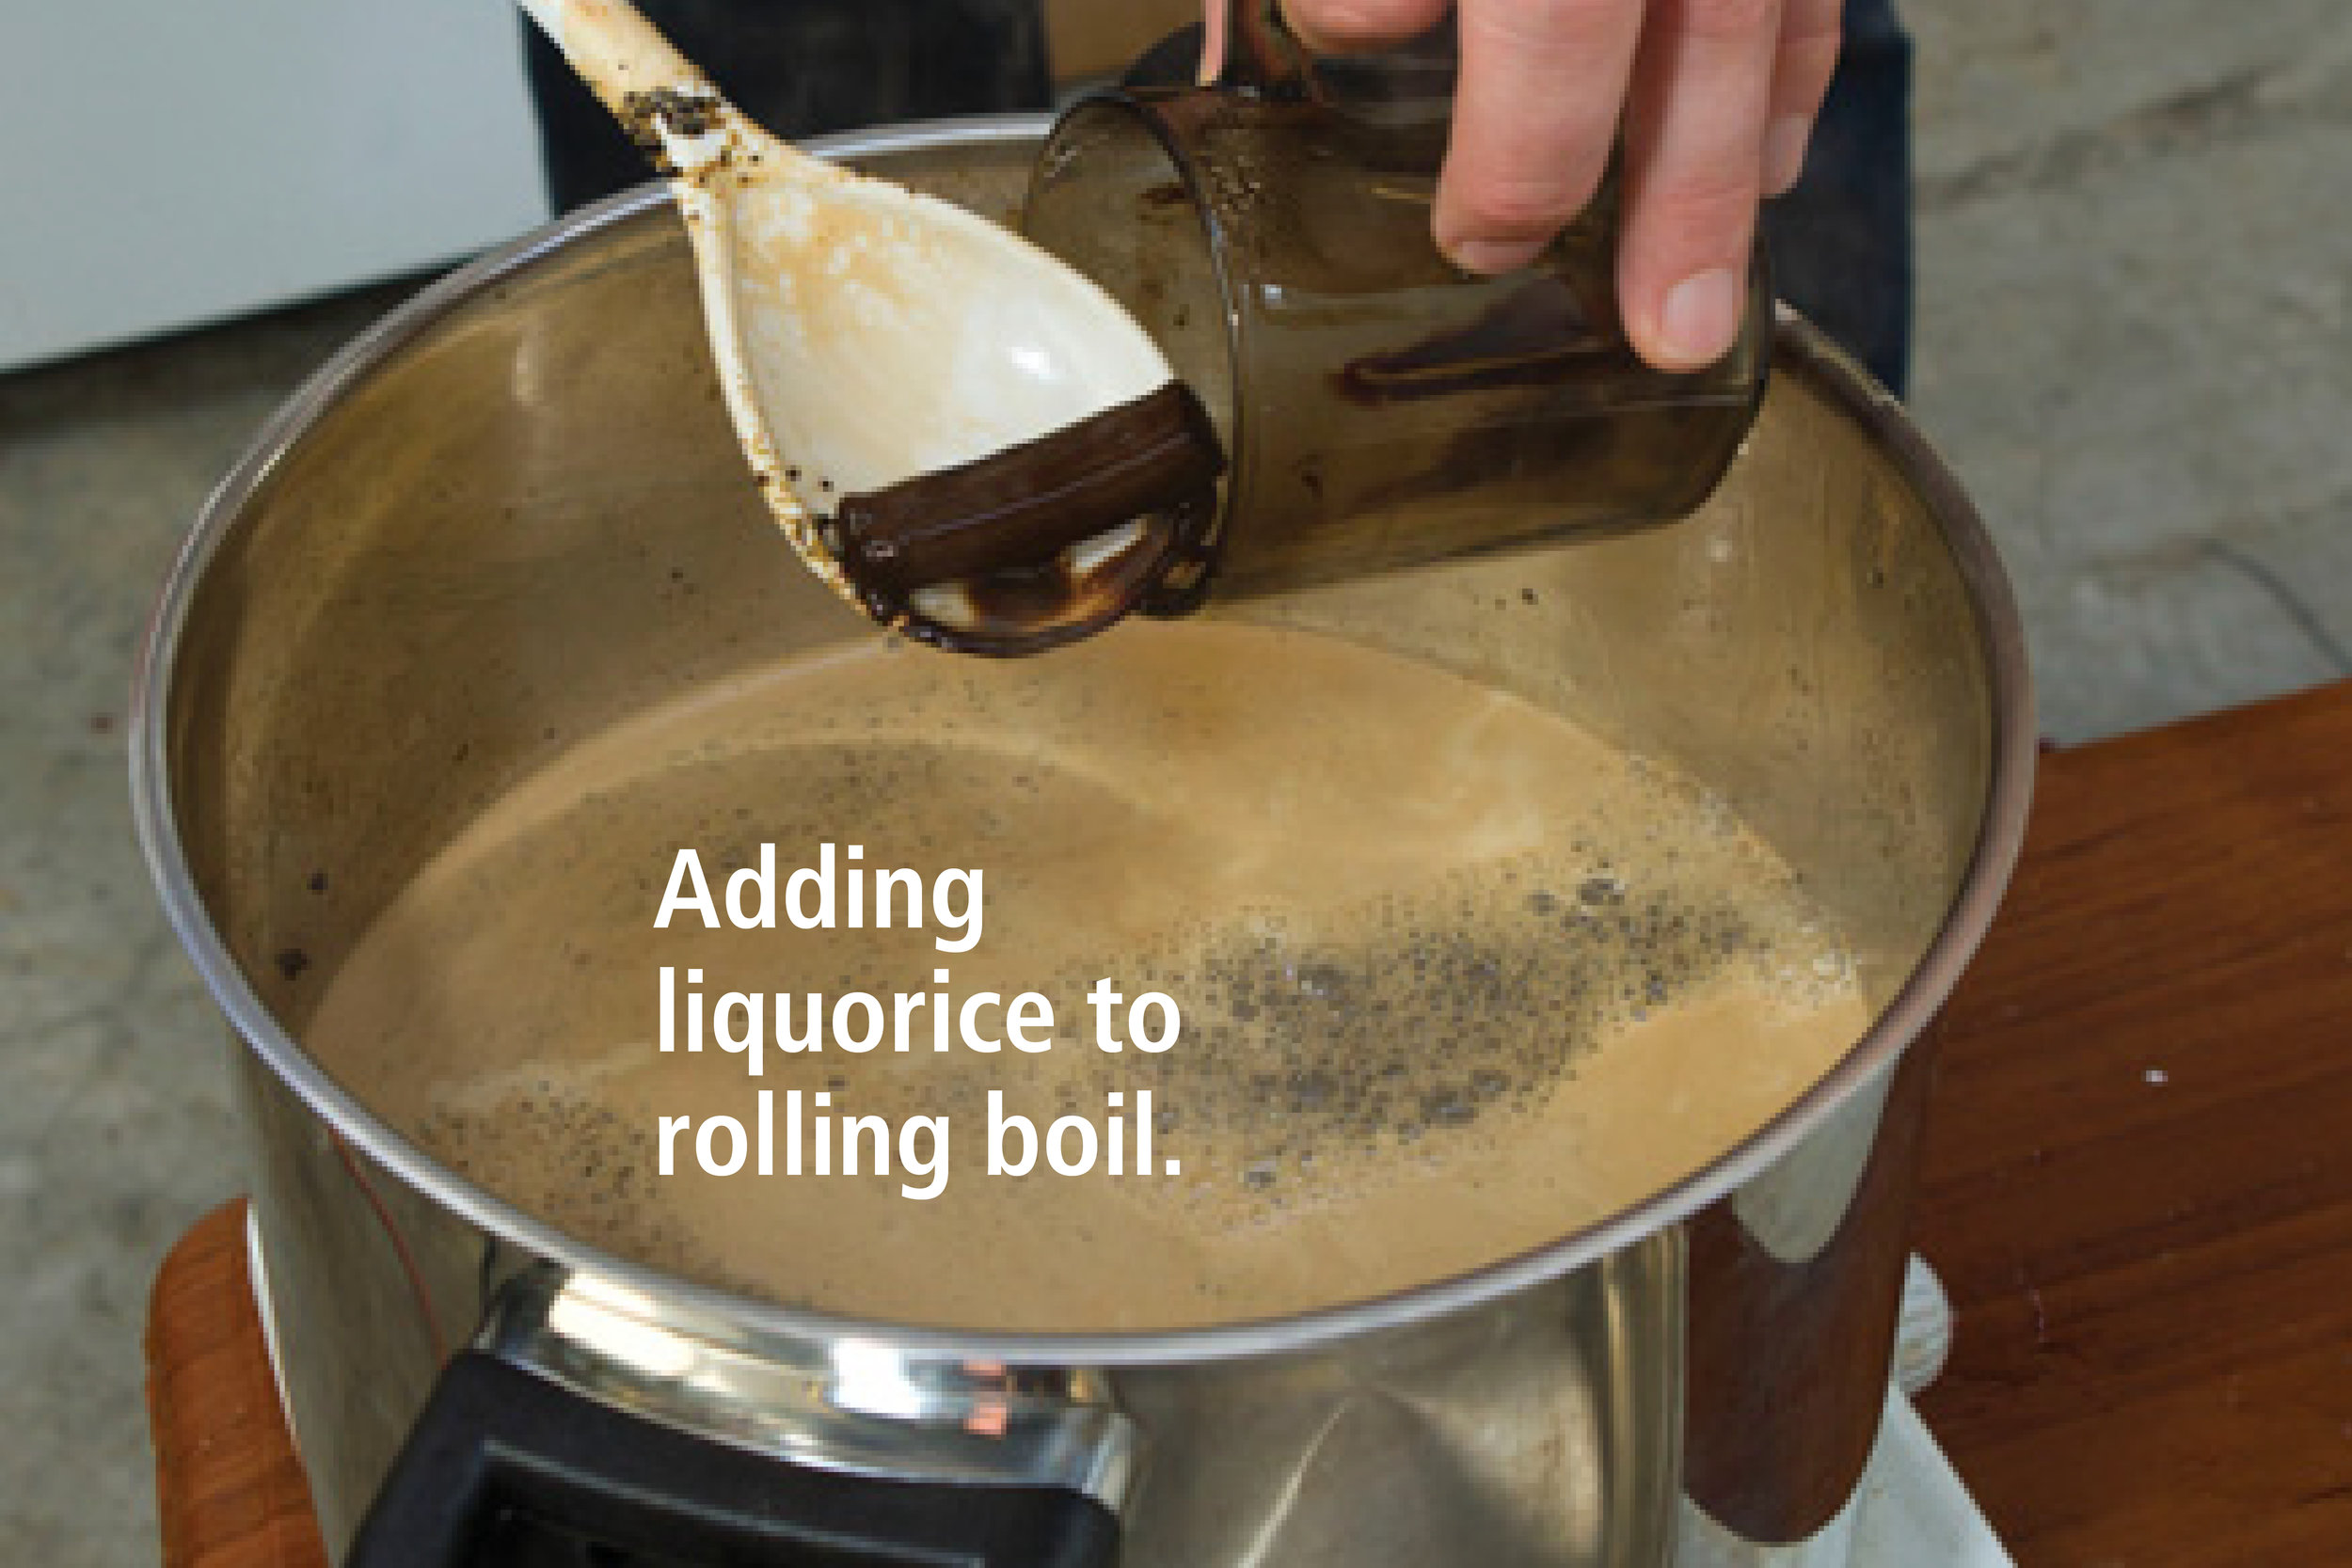 licourice to boil.jpg